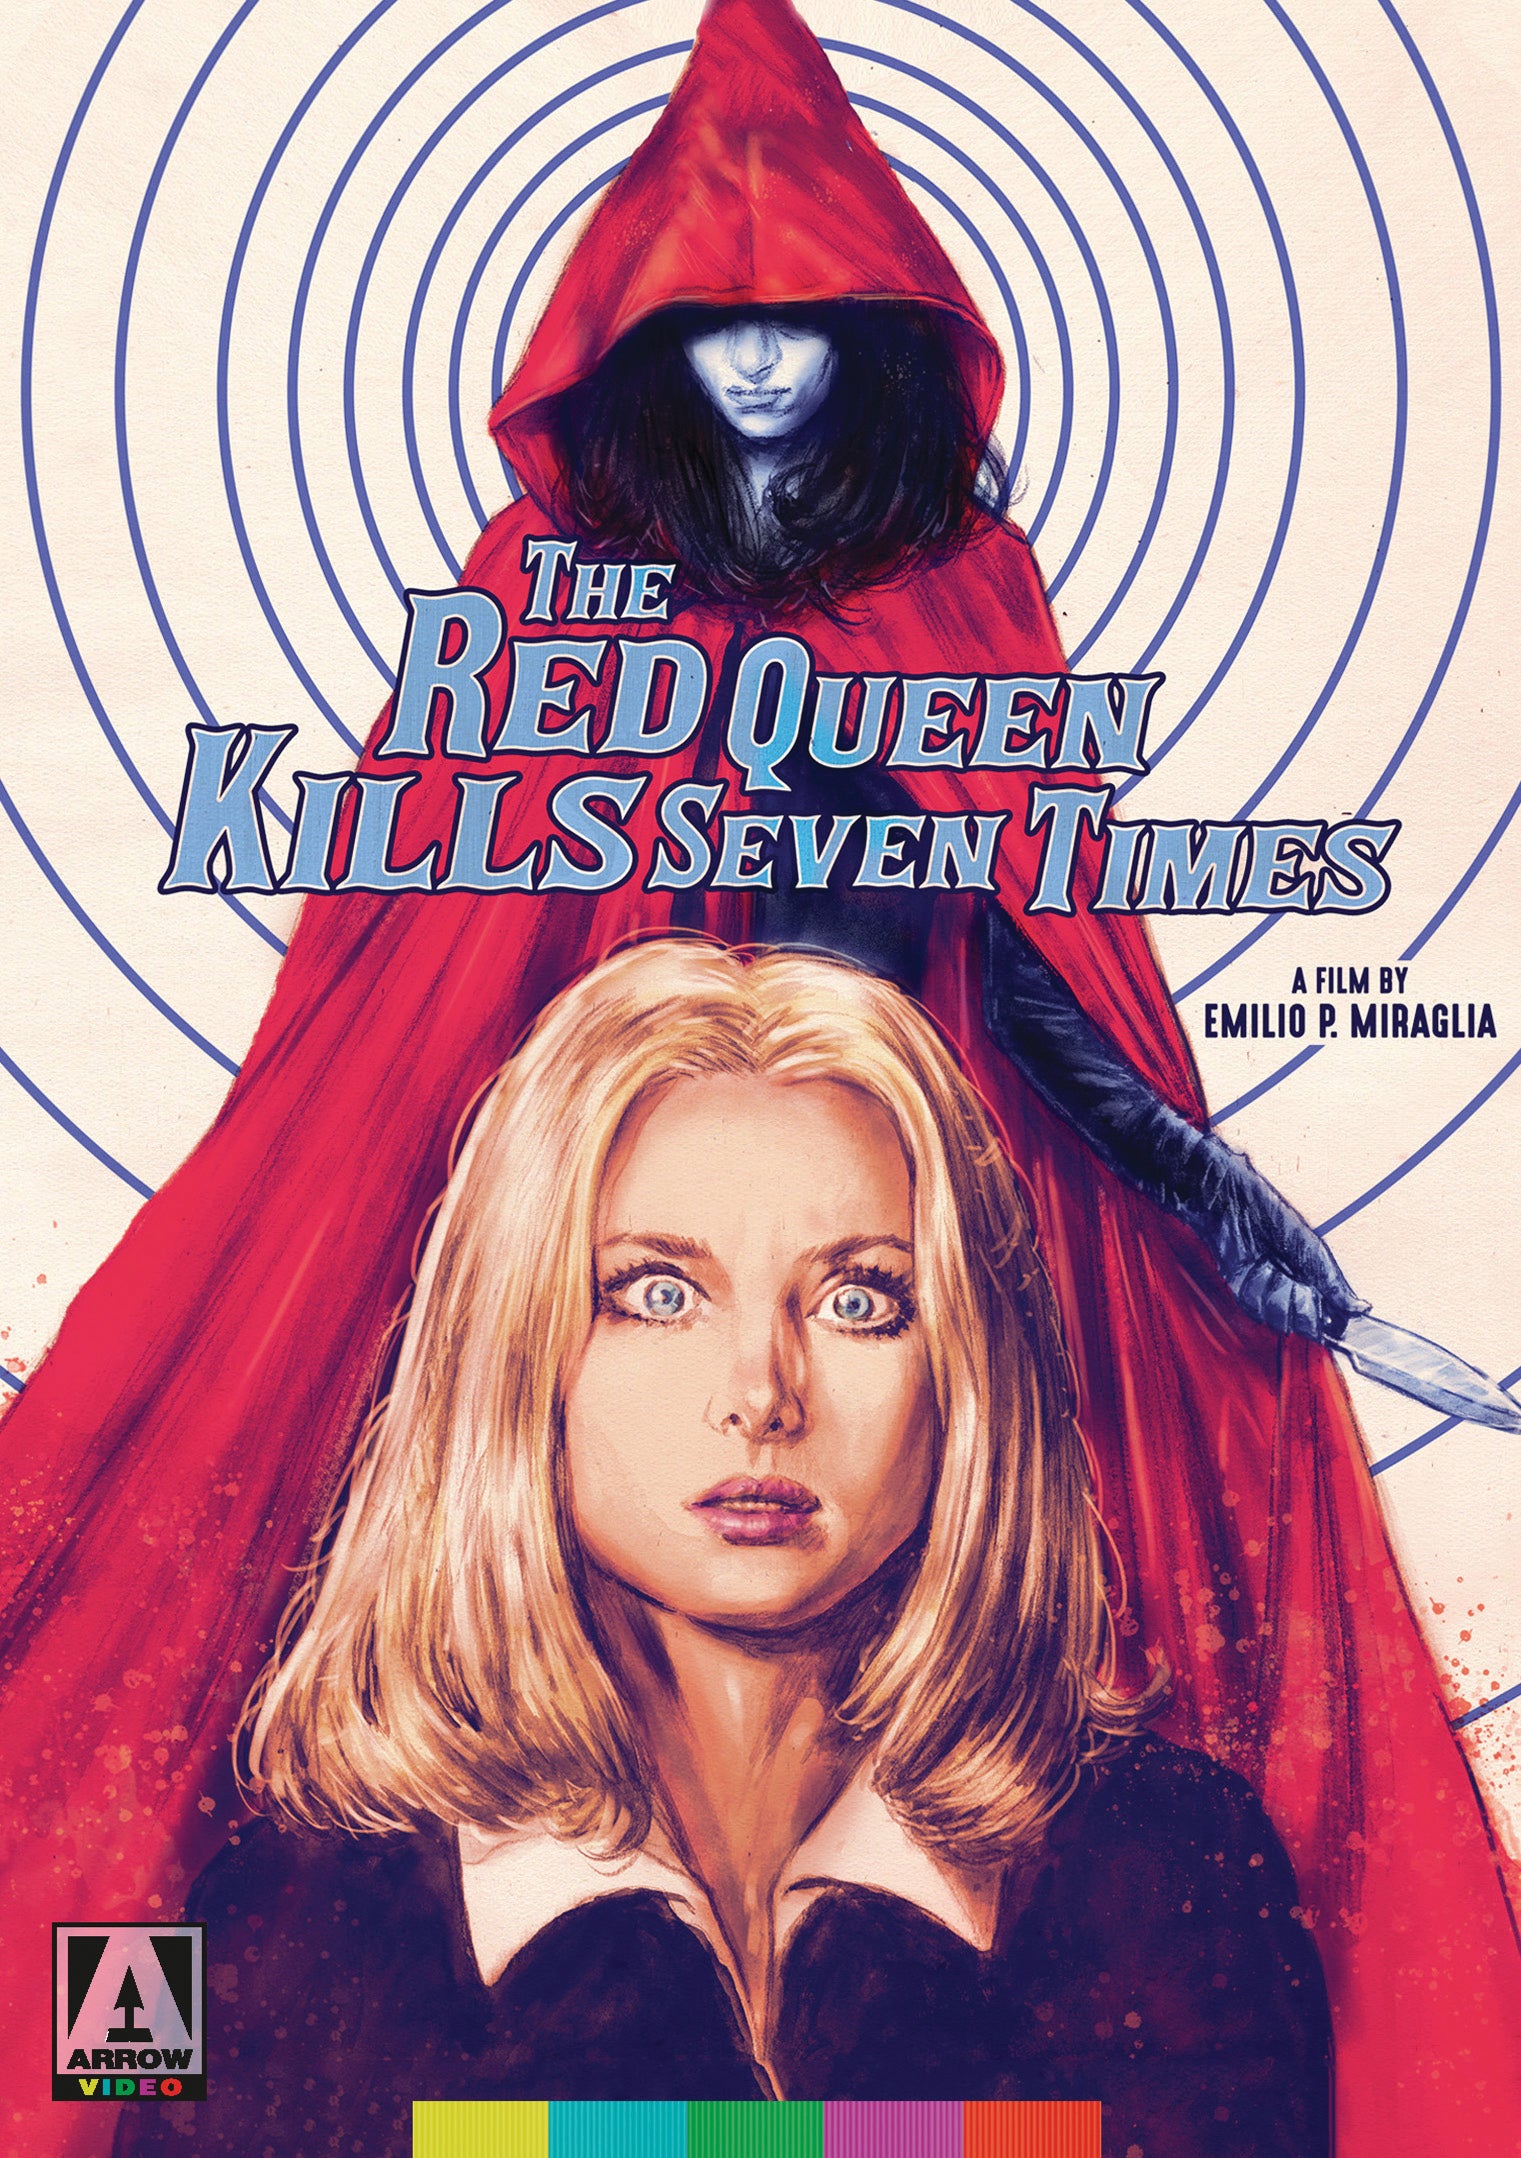 THE RED QUEEN KILLS SEVEN TIMES DVD